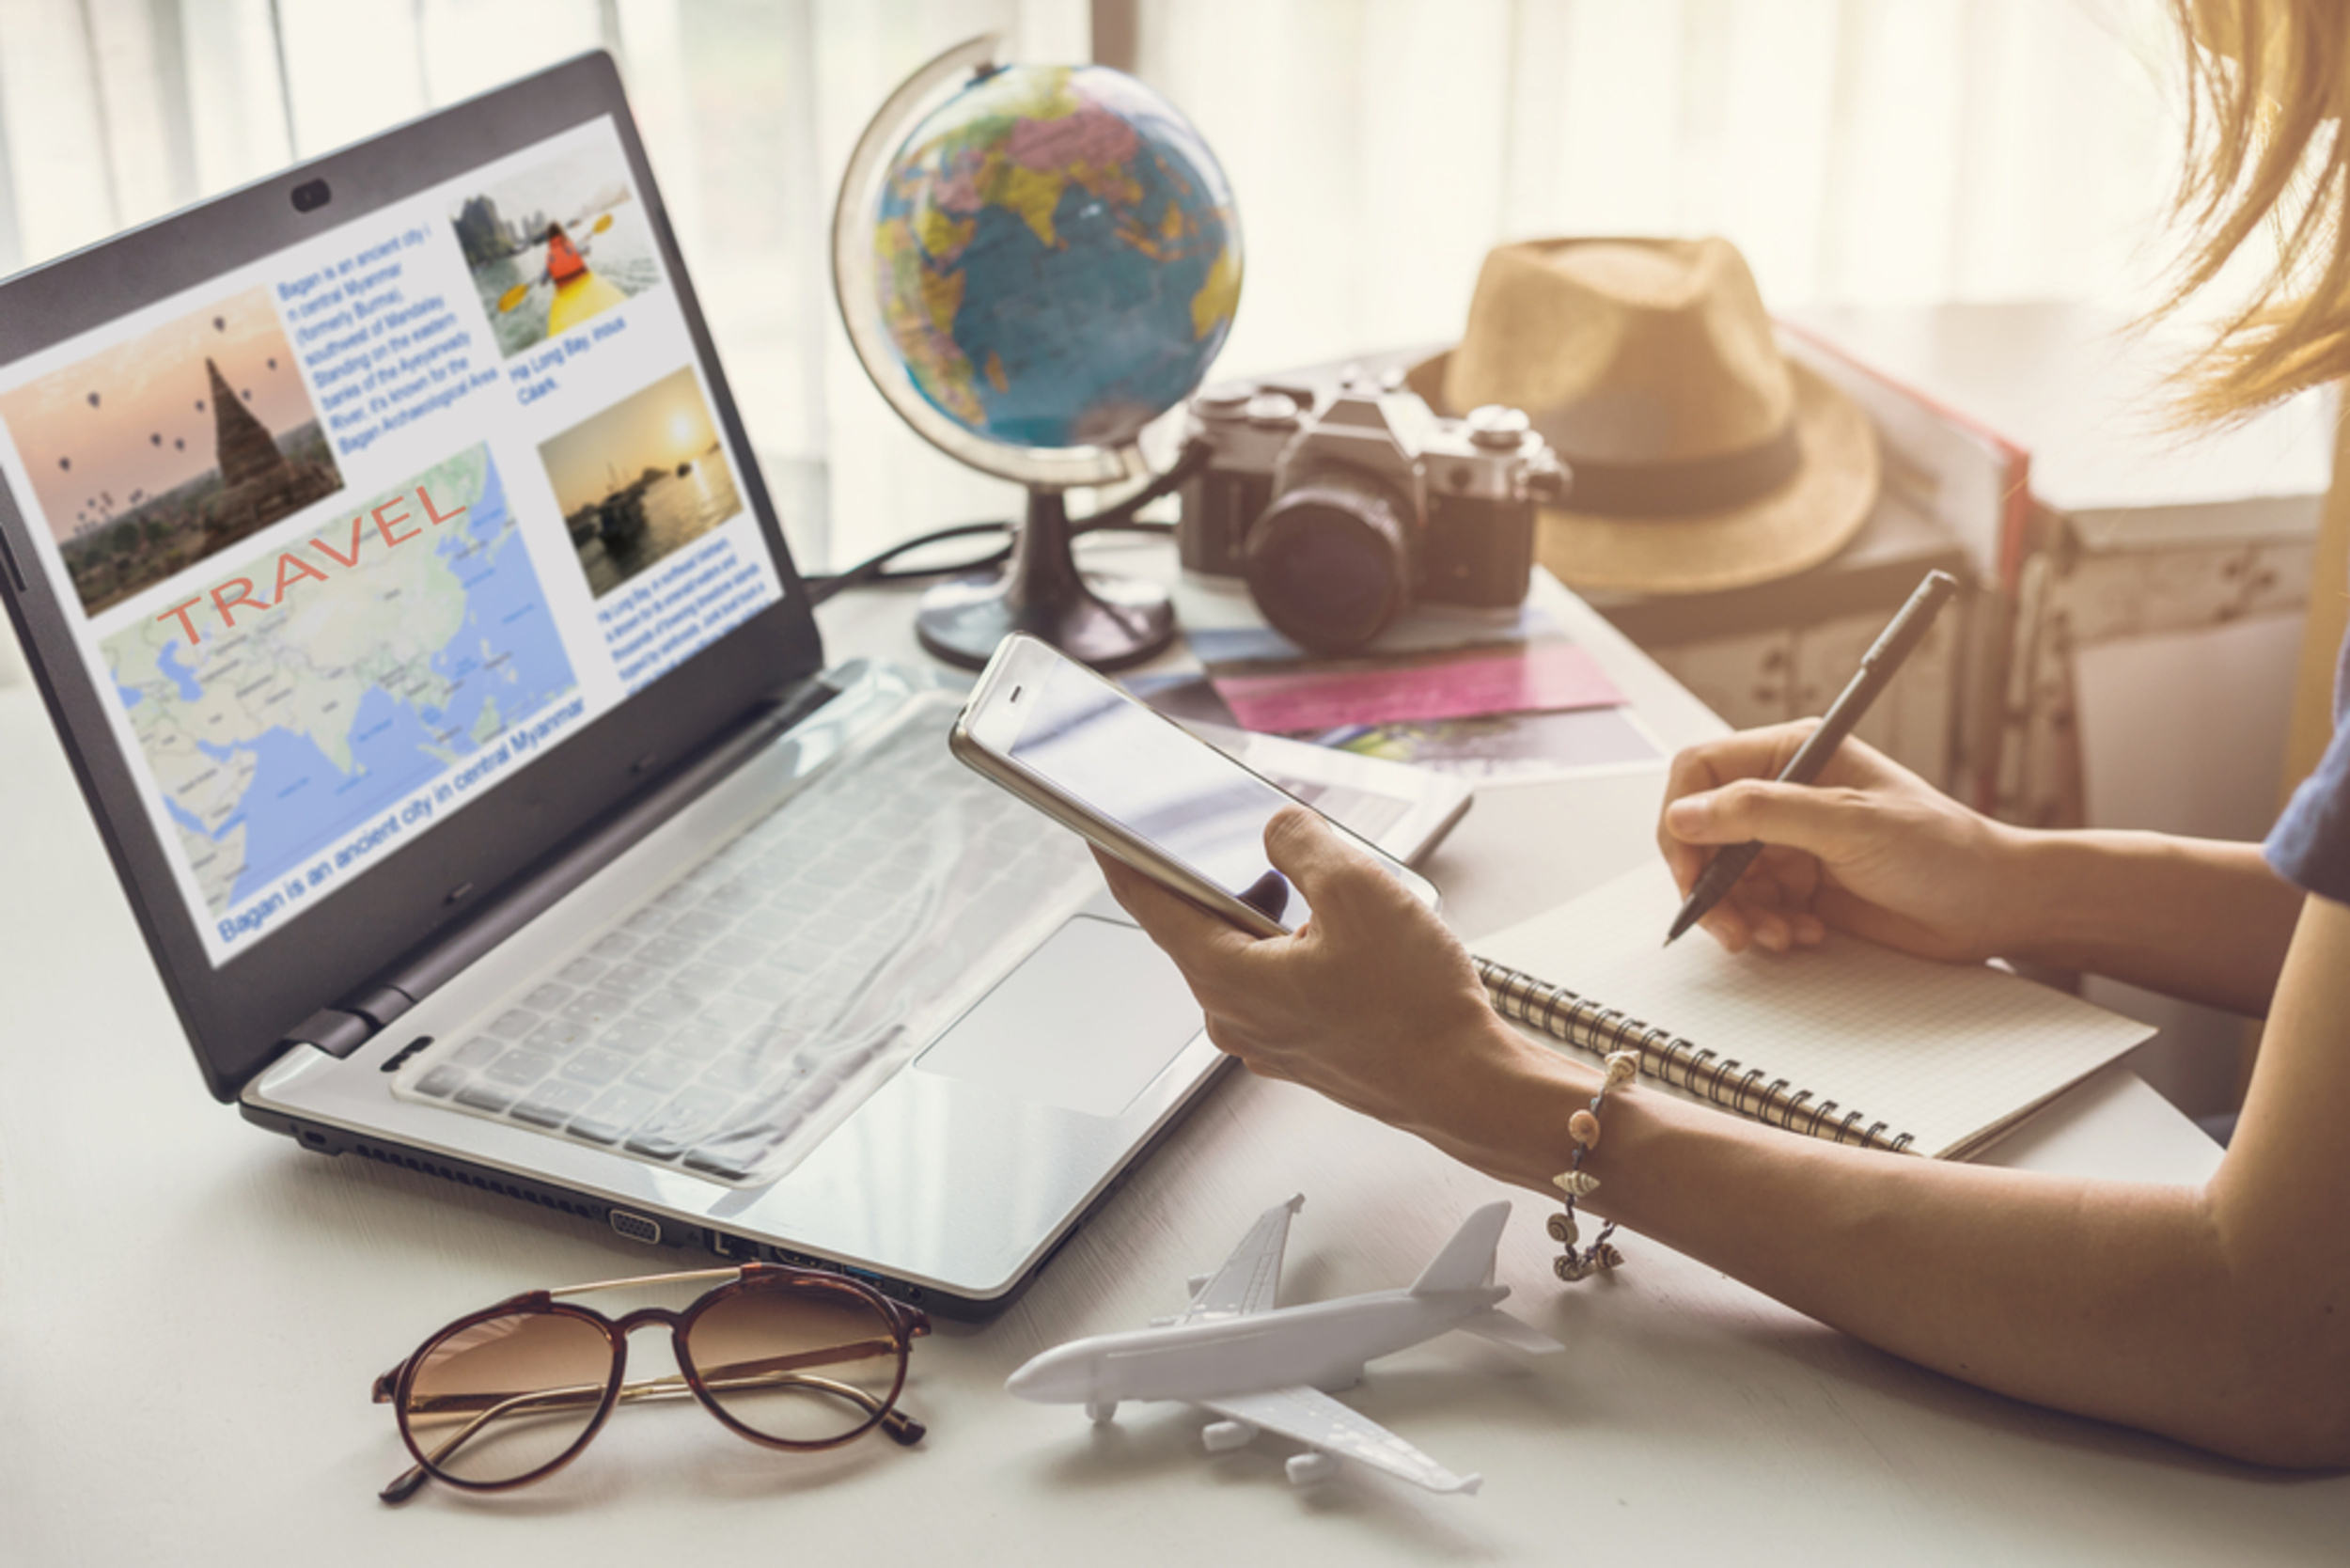 <p>While it is true that many seasoned travelers are able to score last-minute deals, planning ahead is usually the best way to save money — and hassle. At least 3-4 months before your trip, start searching for flights, accommodations, and activities in the area you're hoping to visit to get an idea of how much you'll need to save. </p><p>You may also like: <a href='https://www.yardbarker.com/lifestyle/articles/the_12_best_day_trips_from_european_cities_031524/s1__38397783'>The 12 best day trips from European cities</a></p>